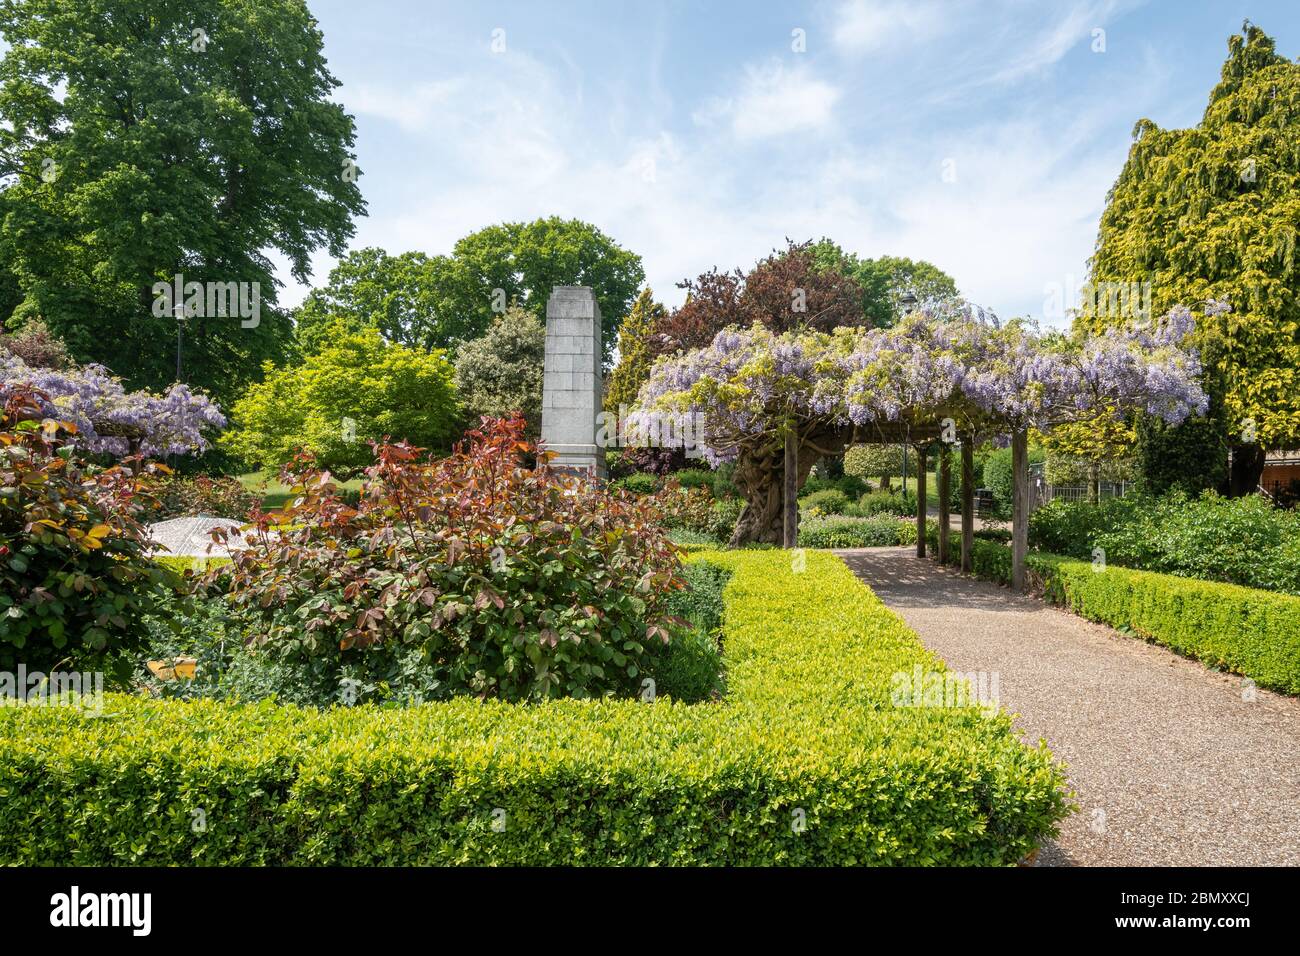 Municipal Gardens in the Hampshire town of Aldershot during May, with a wisteria covered pergola in flower, UK Stock Photo